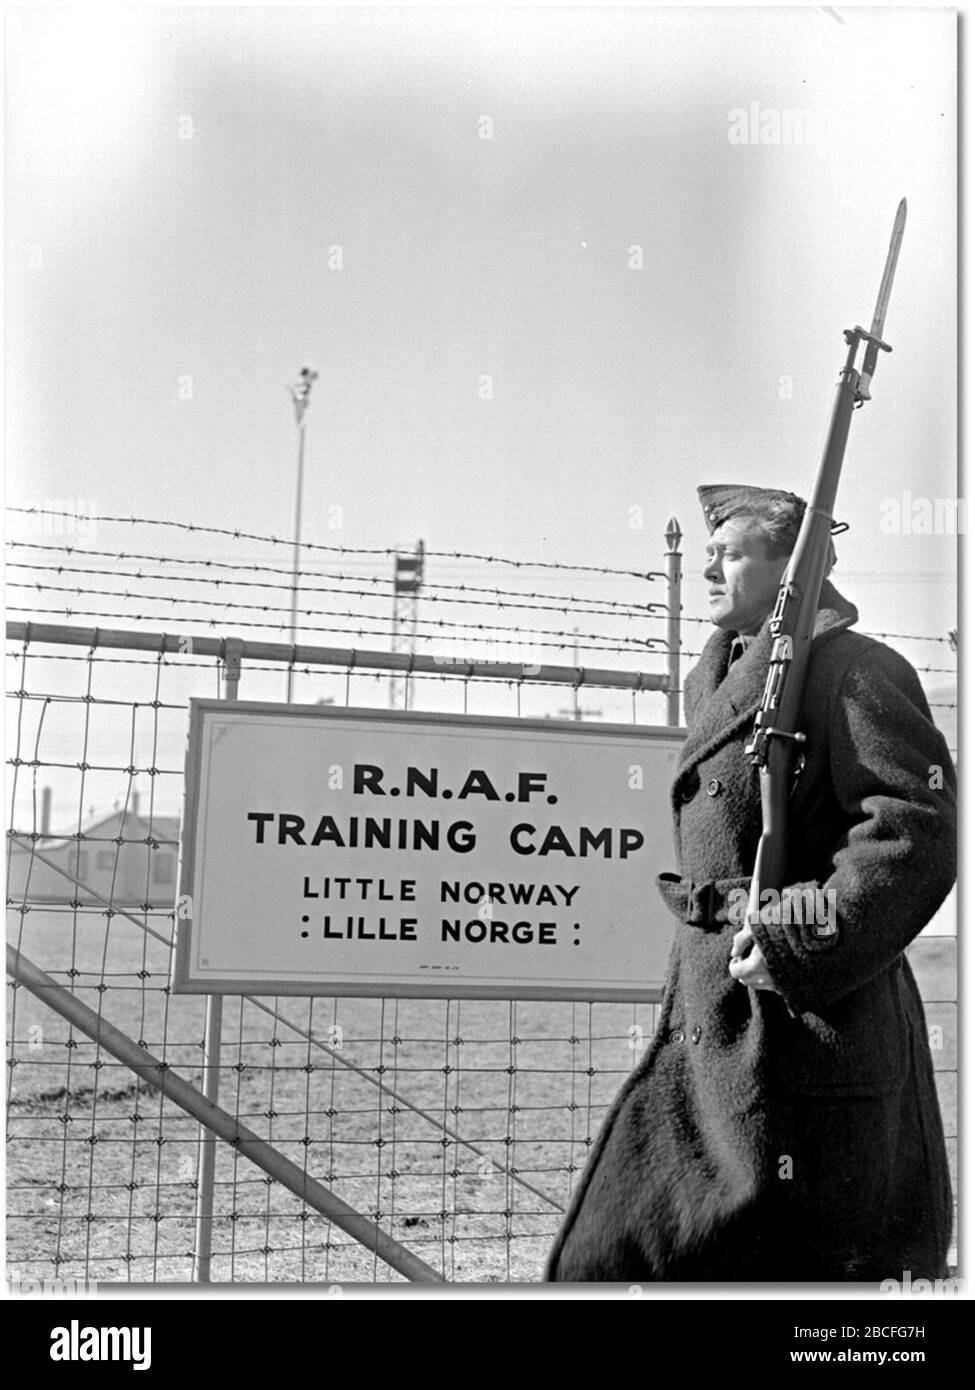 'Little Norway, November 1940 (Royal Norwegian Air Force training facility in Toronto, Canada); November 1940; This image is available from the Archives of Ontario under the  item reference code C 109-2-0-18This tag does not indicate the copyright status of the attached work. A normal copyright tag is still required. See Commons:Licensing. English | français | македонски | +/−; Unknown author; ' Stock Photo